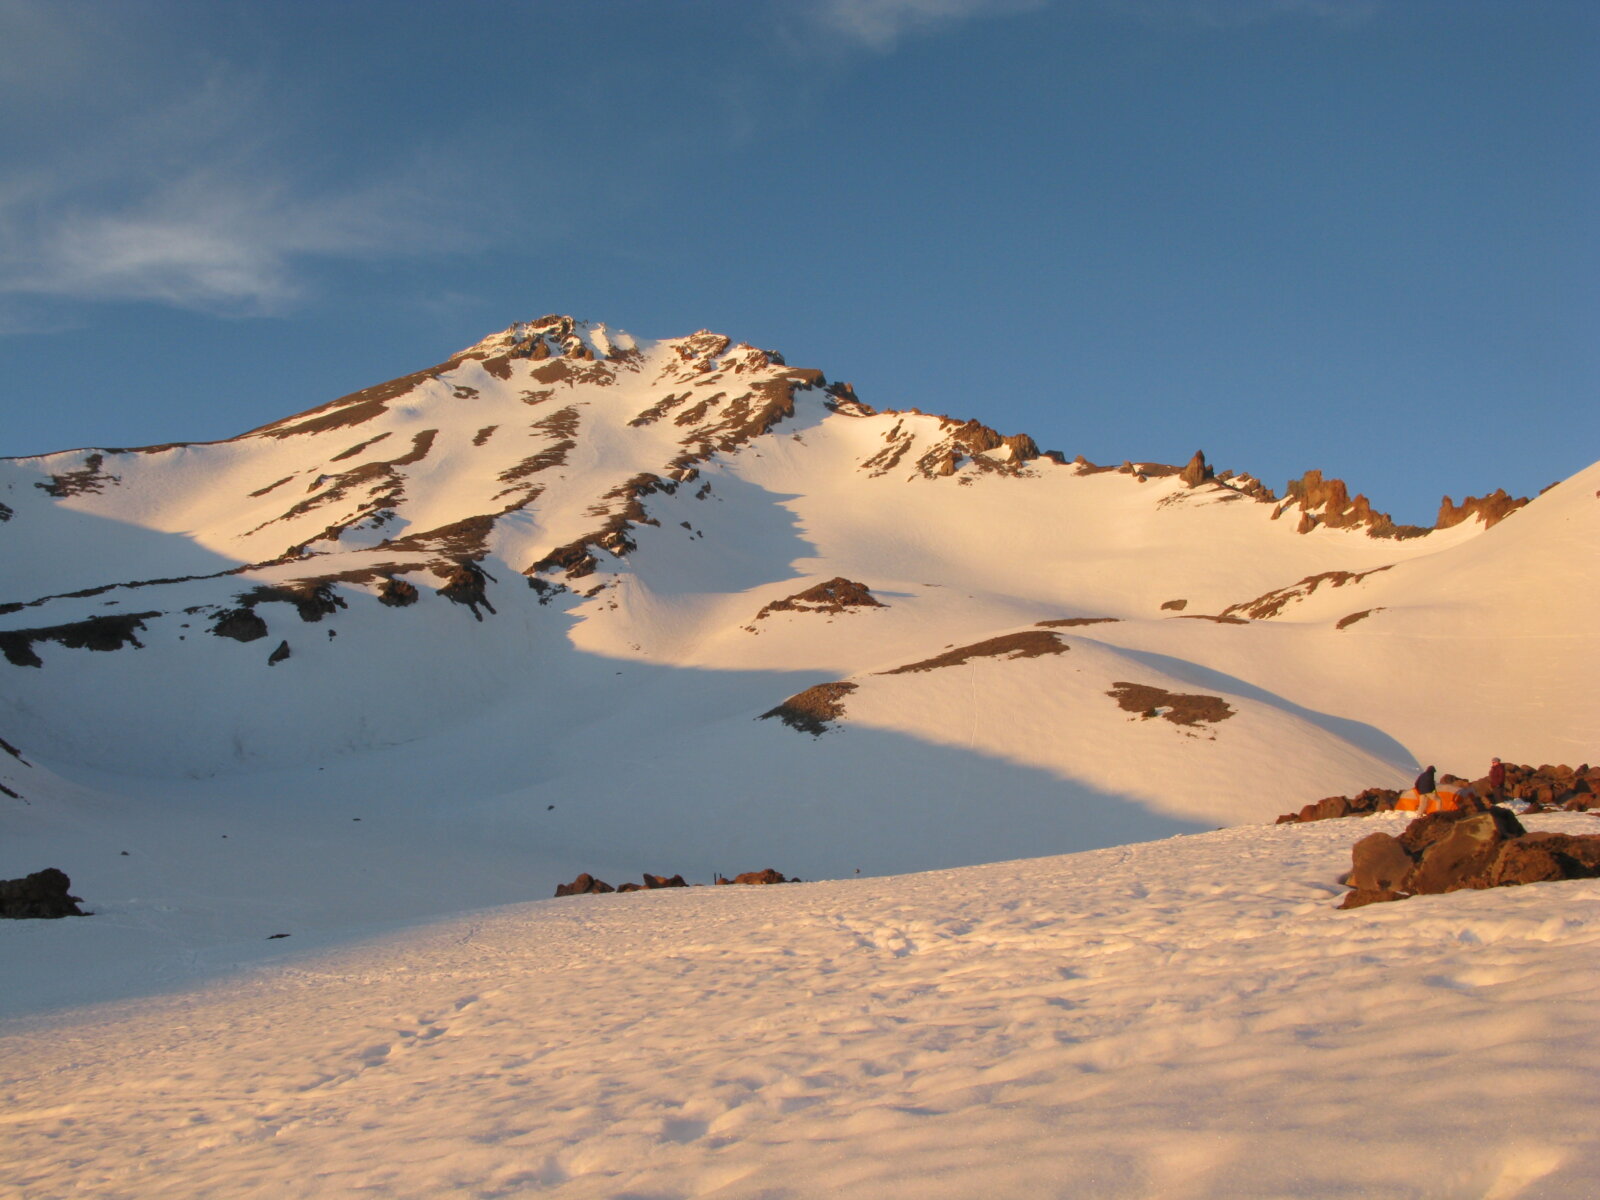 An early morning photo of mount Shasta covered in snow with a blue sky above. Climb Mount Shasta with us!